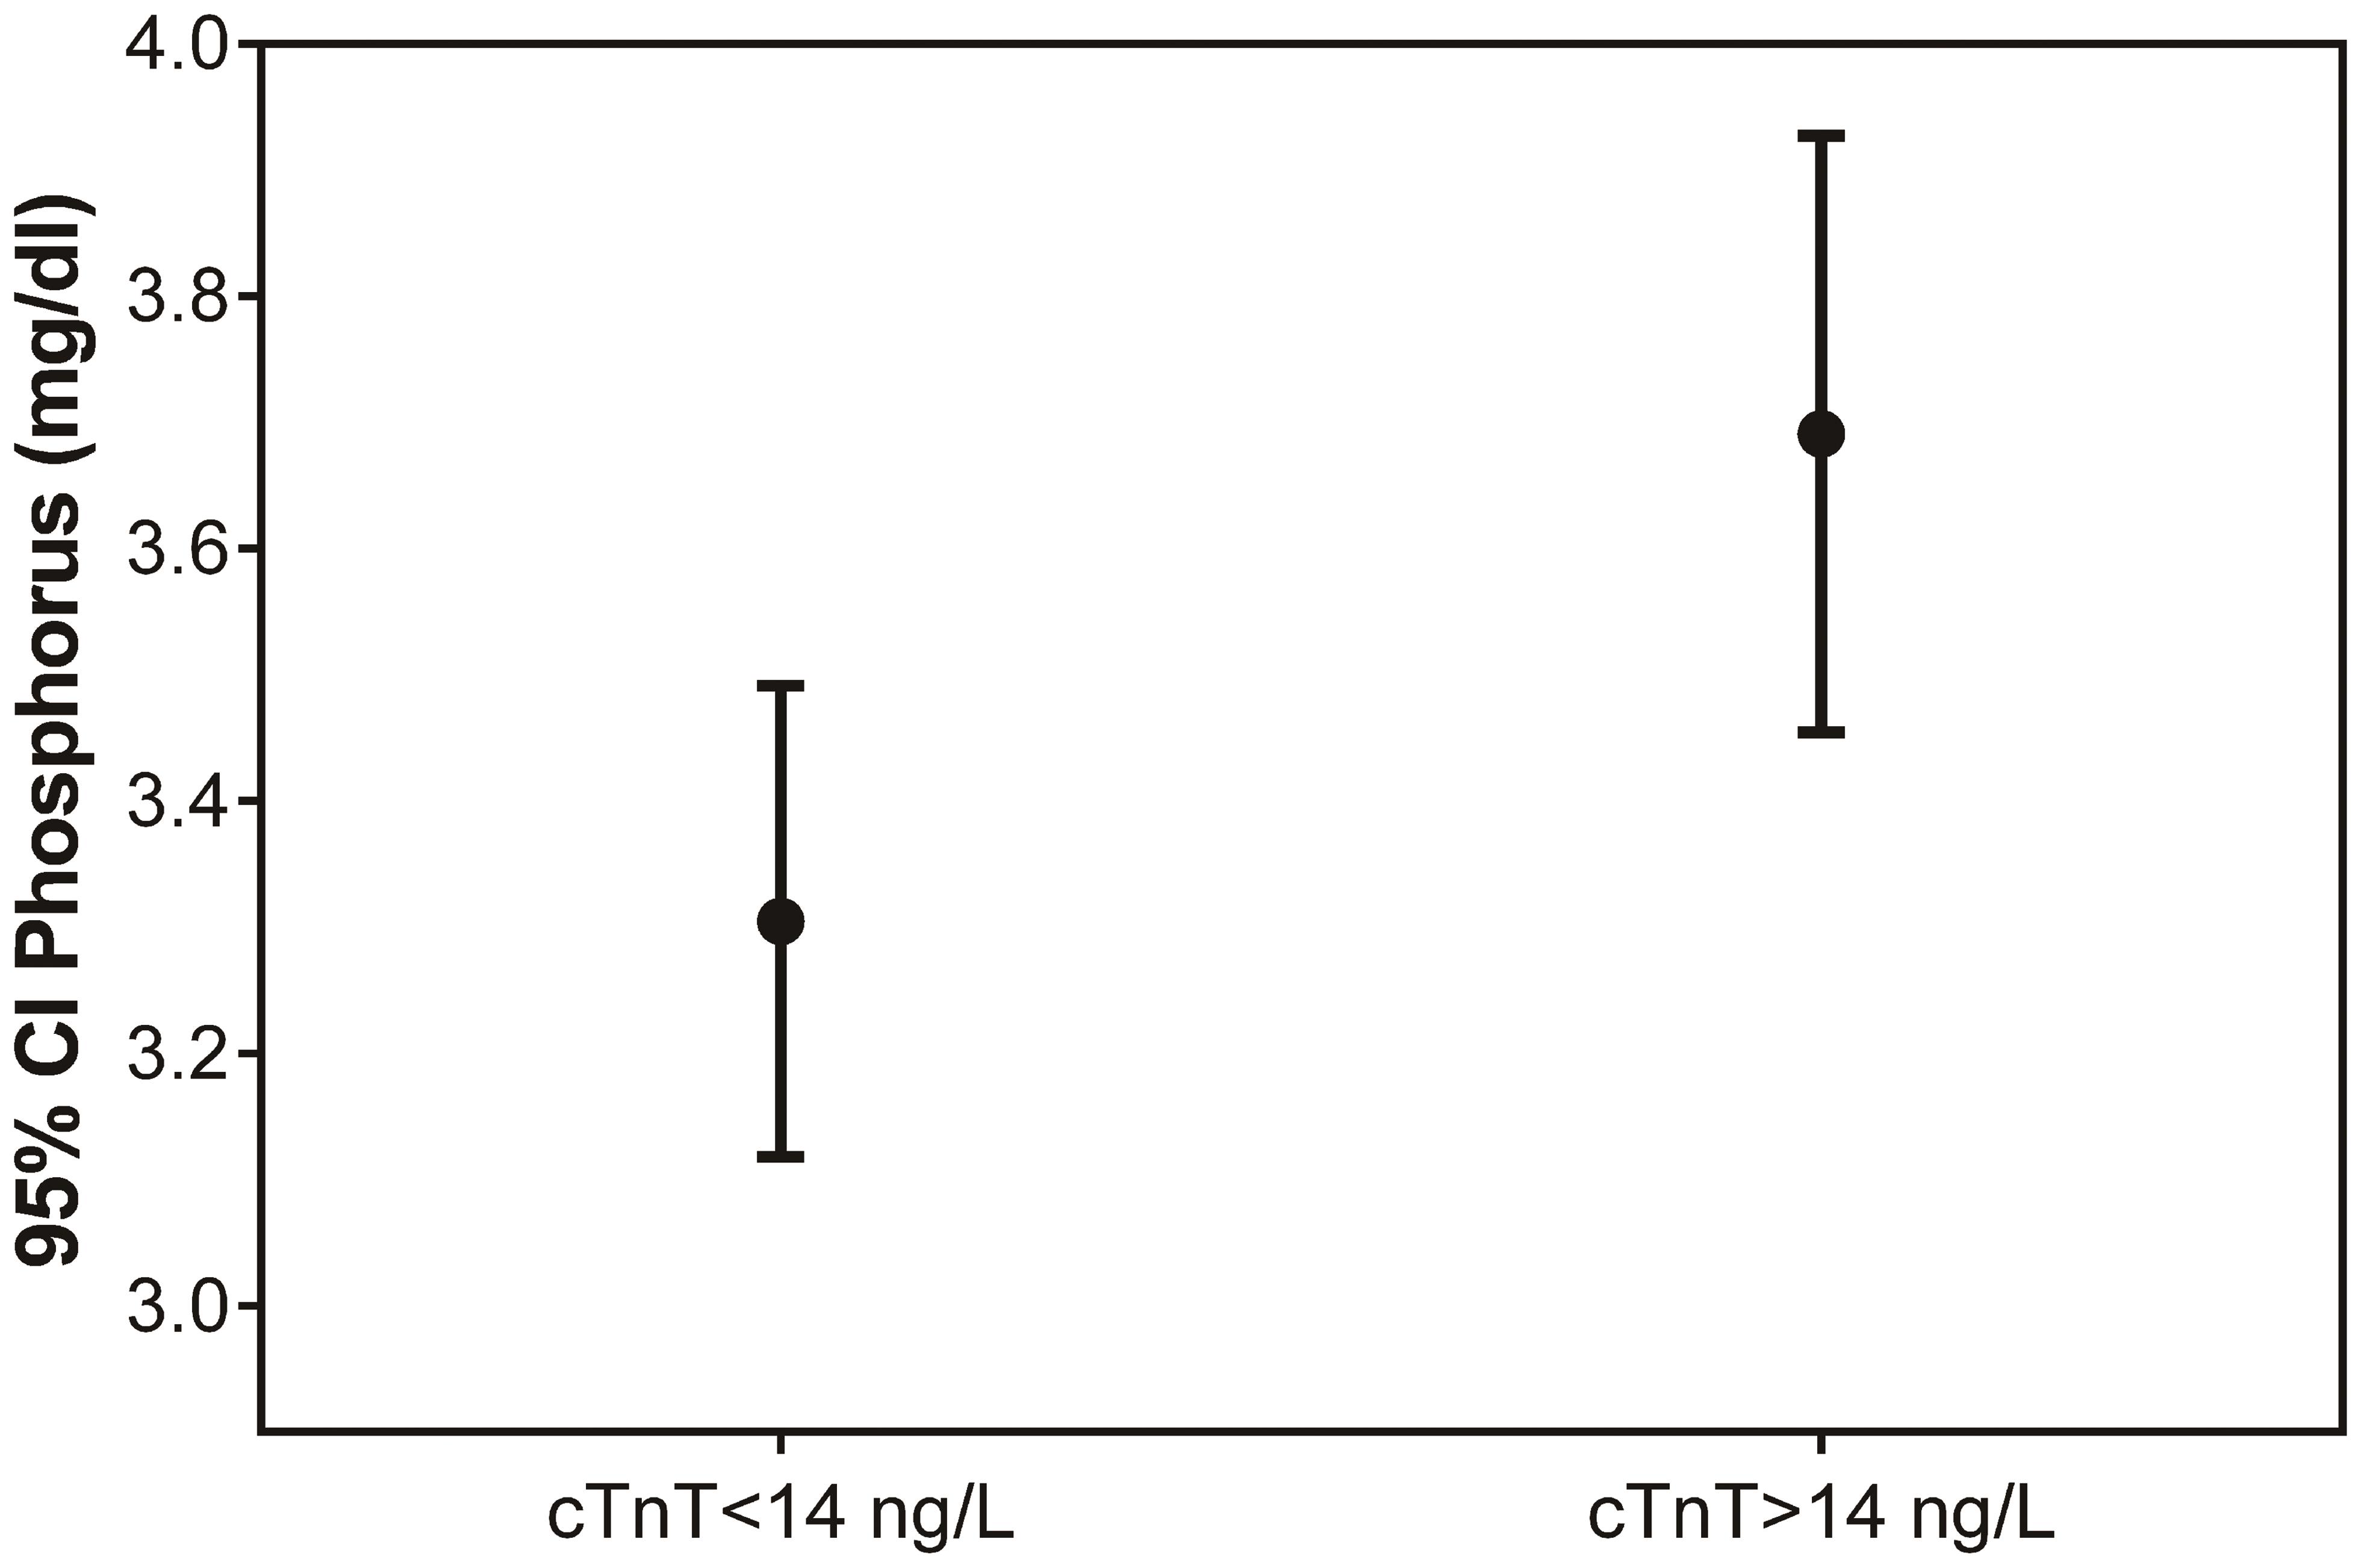 Serum phosphate (P) in patients with elevated concentrations of high sensitivity cardiac troponin T (cTnT) levels, when compared to patients with normal cTnT serum concentrations (<italic>p</italic> < 0.05).